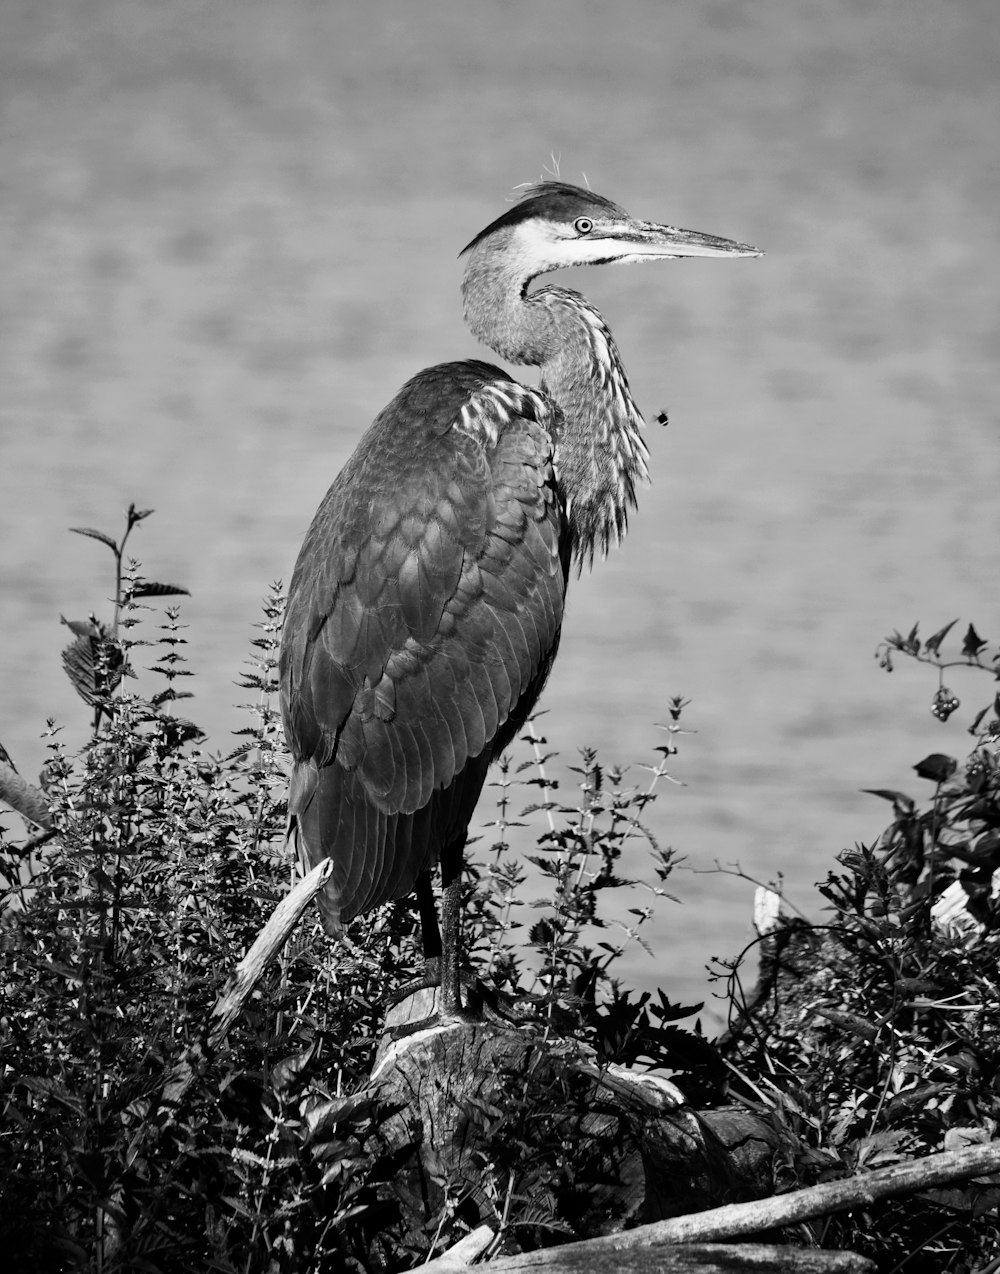 grayscale photo of long-beaked bird perched on rock